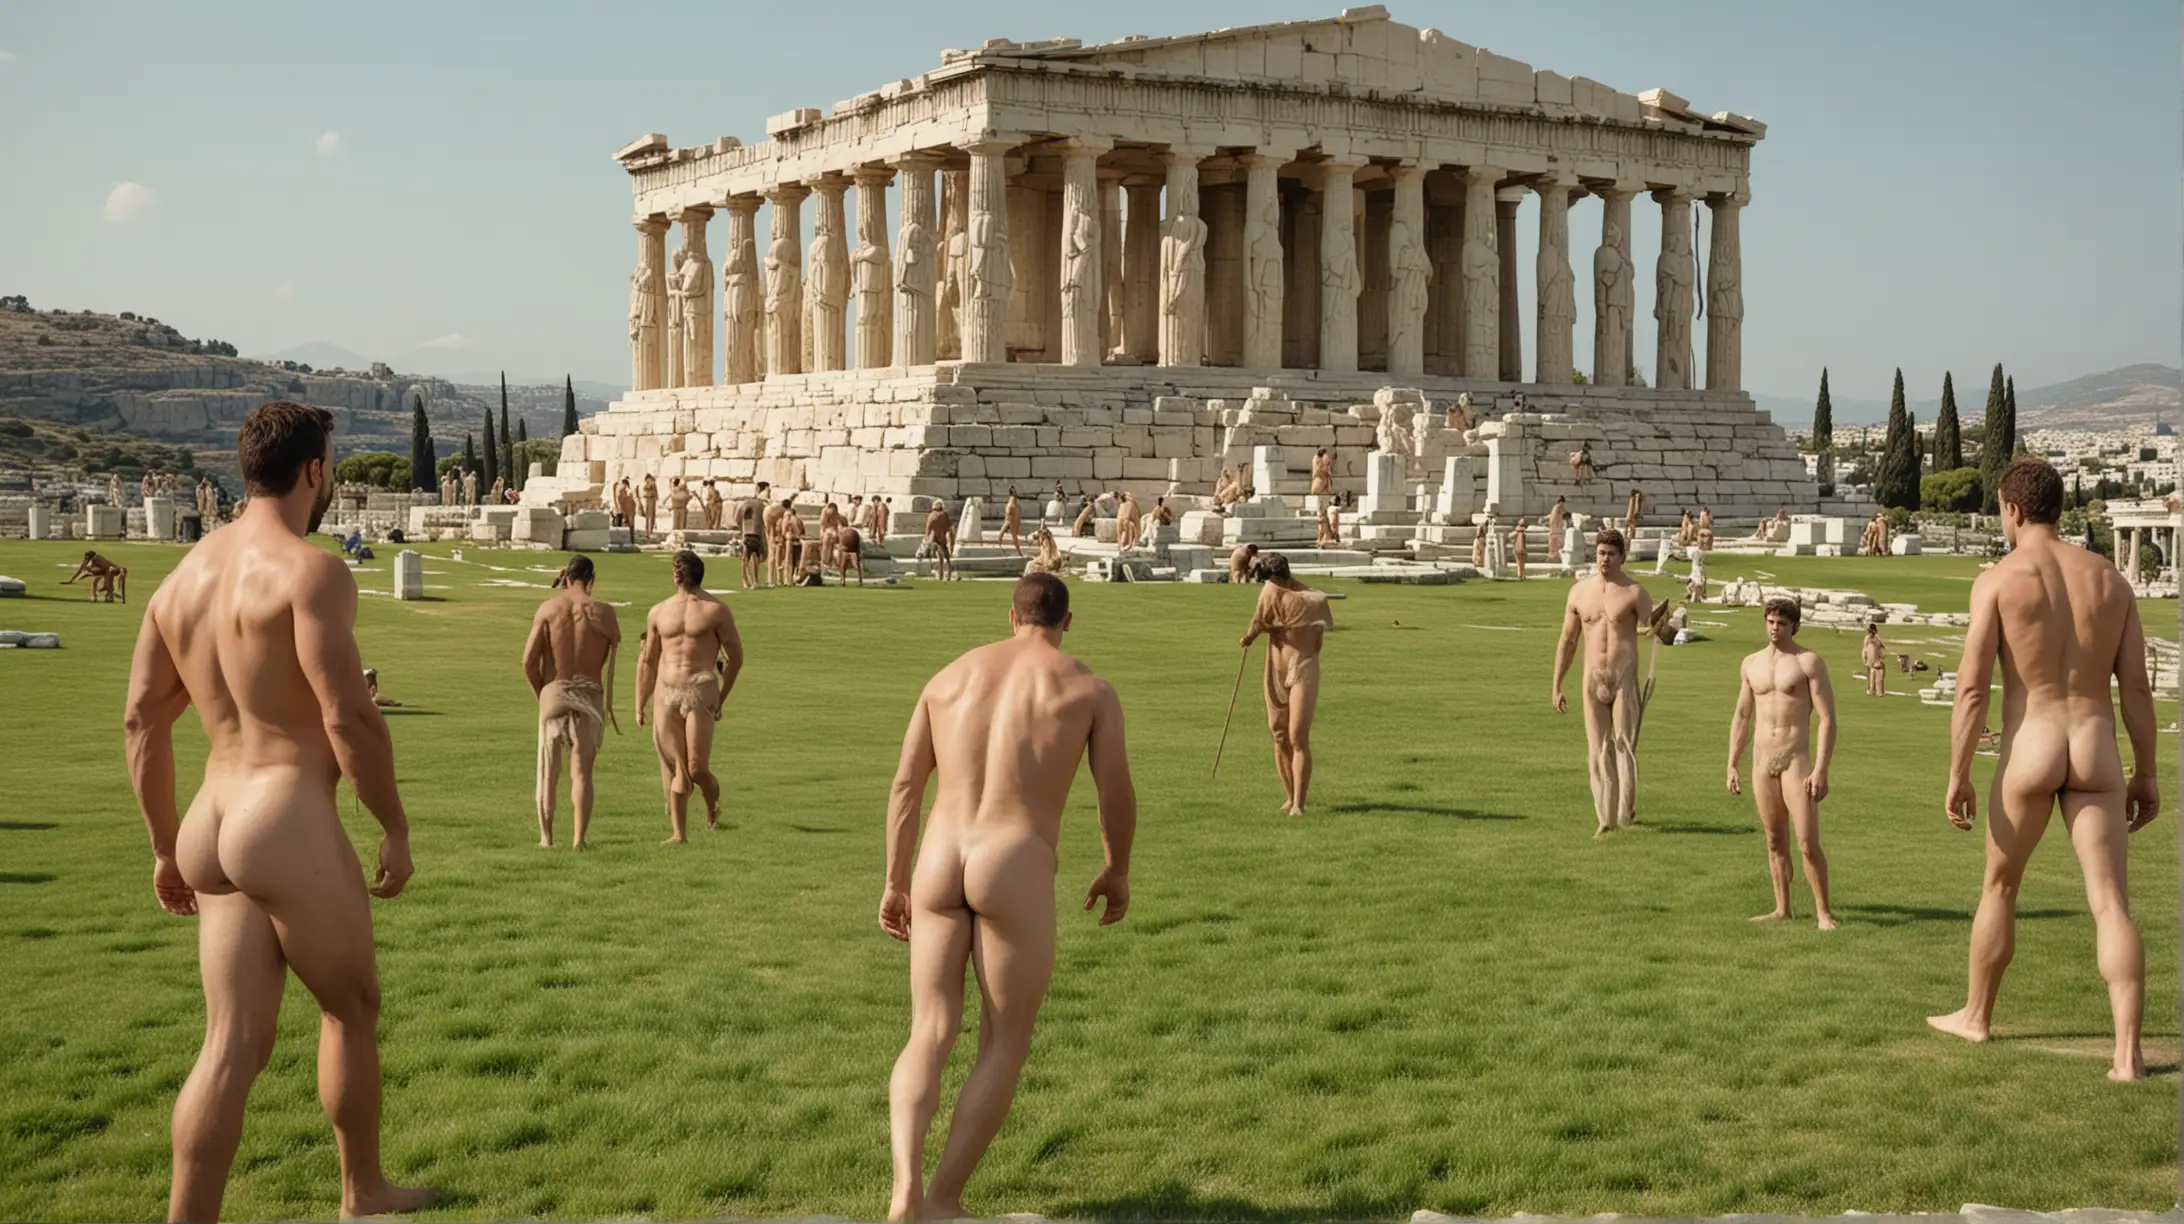 a big grass lawn in ancient greece,  in the background are muscular naked homoerotic statues of greek gods in the background